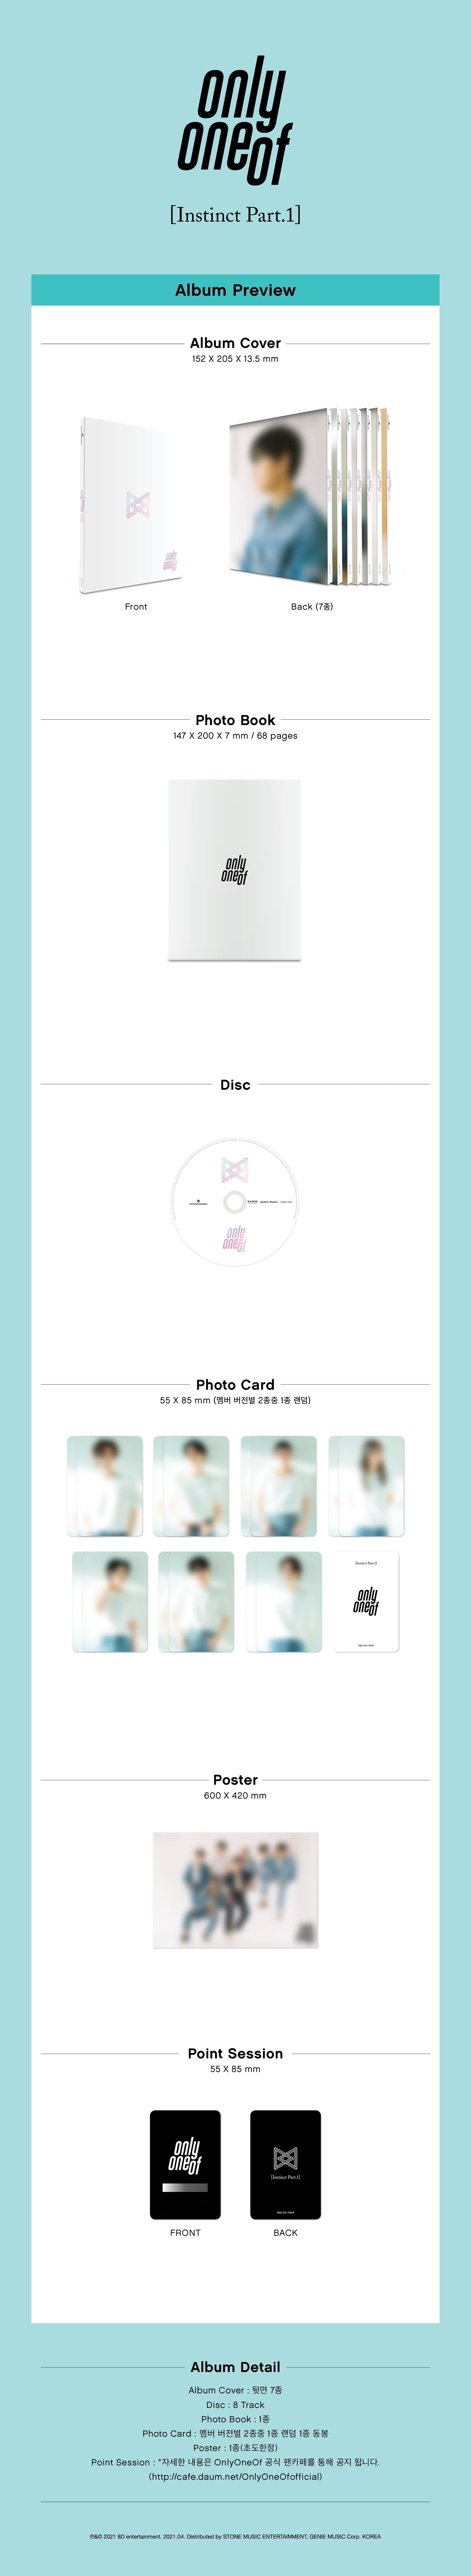 1 CD
1 Photo Book (68 pages)
1 Photo Card
1 Point Session